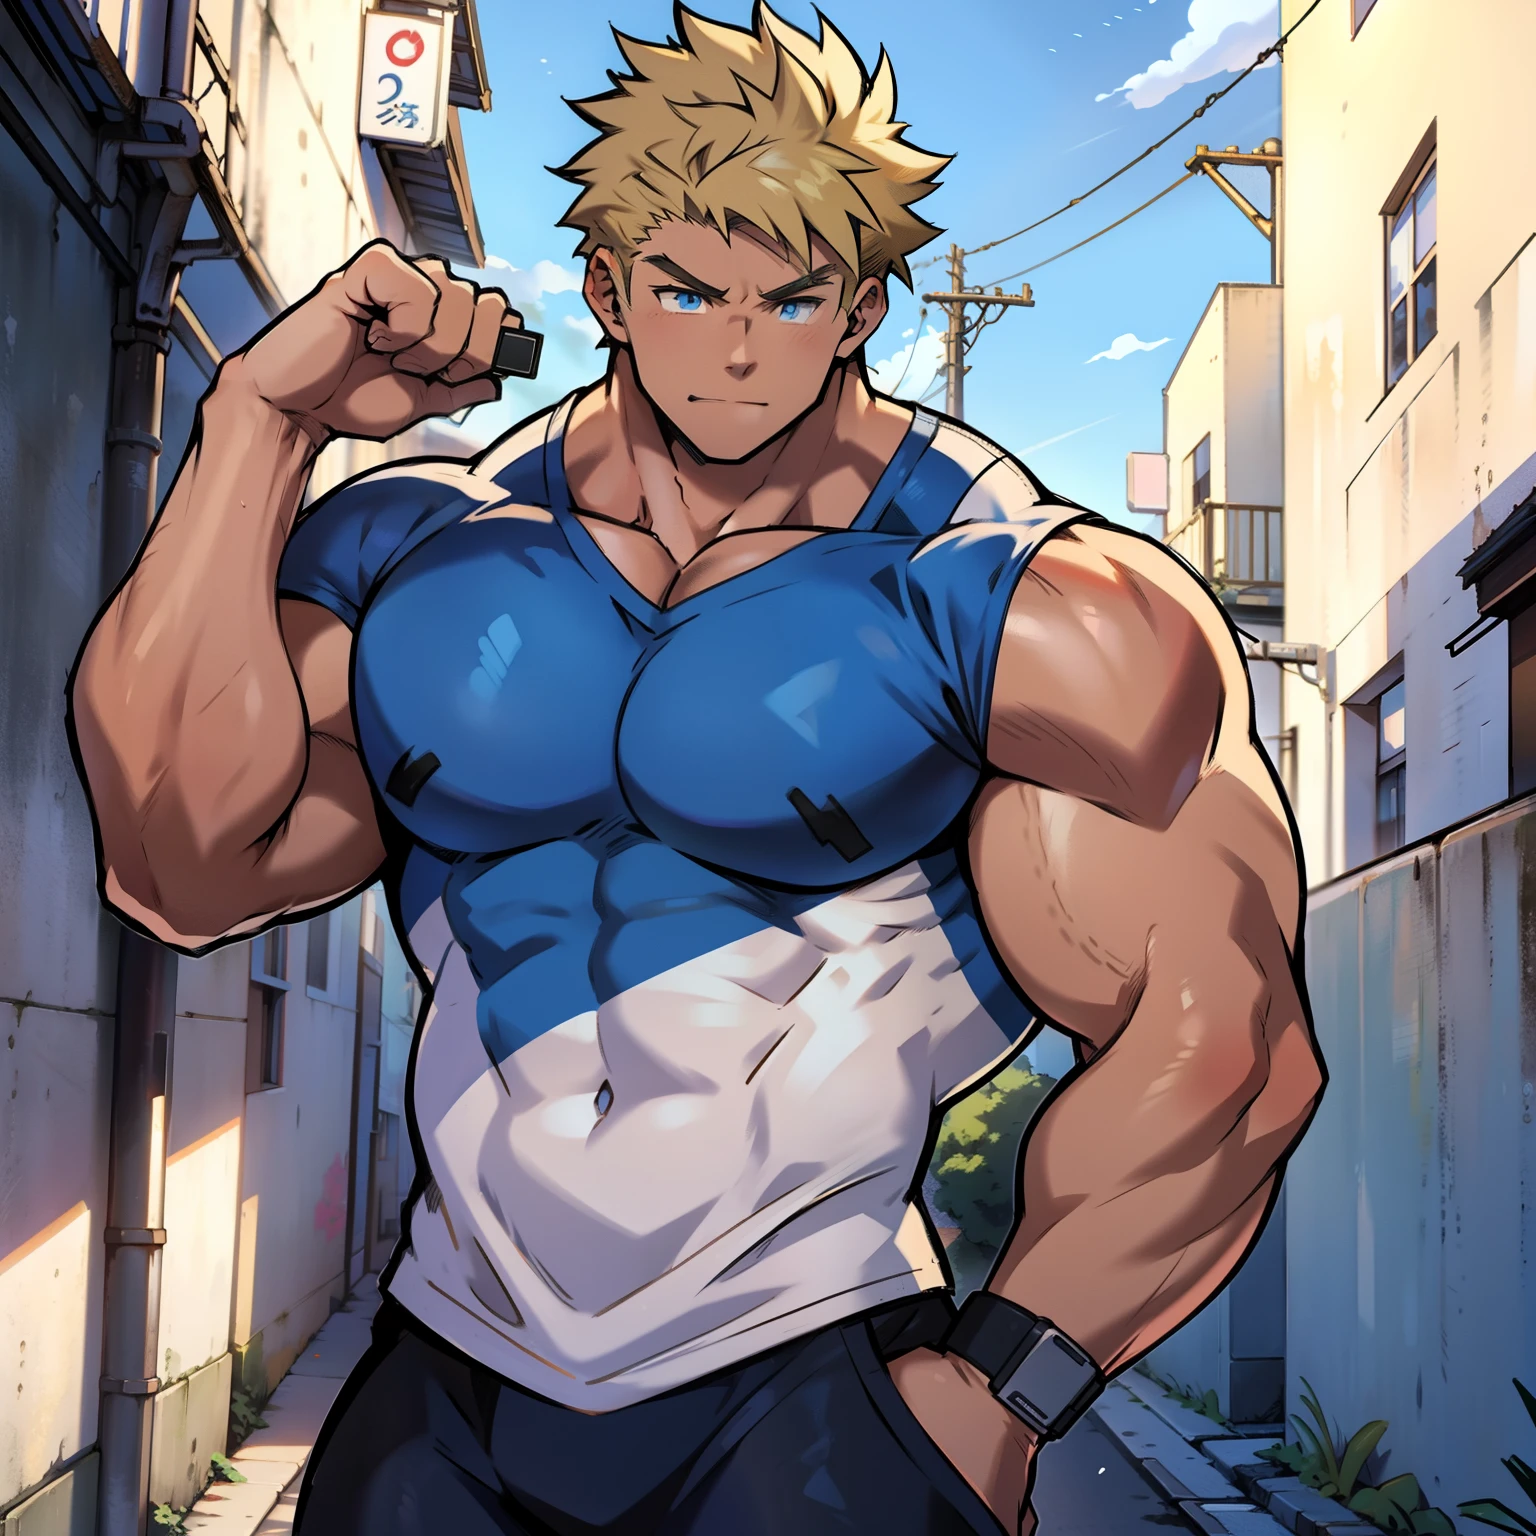 Anime style art)), Extremely muscular masculine character